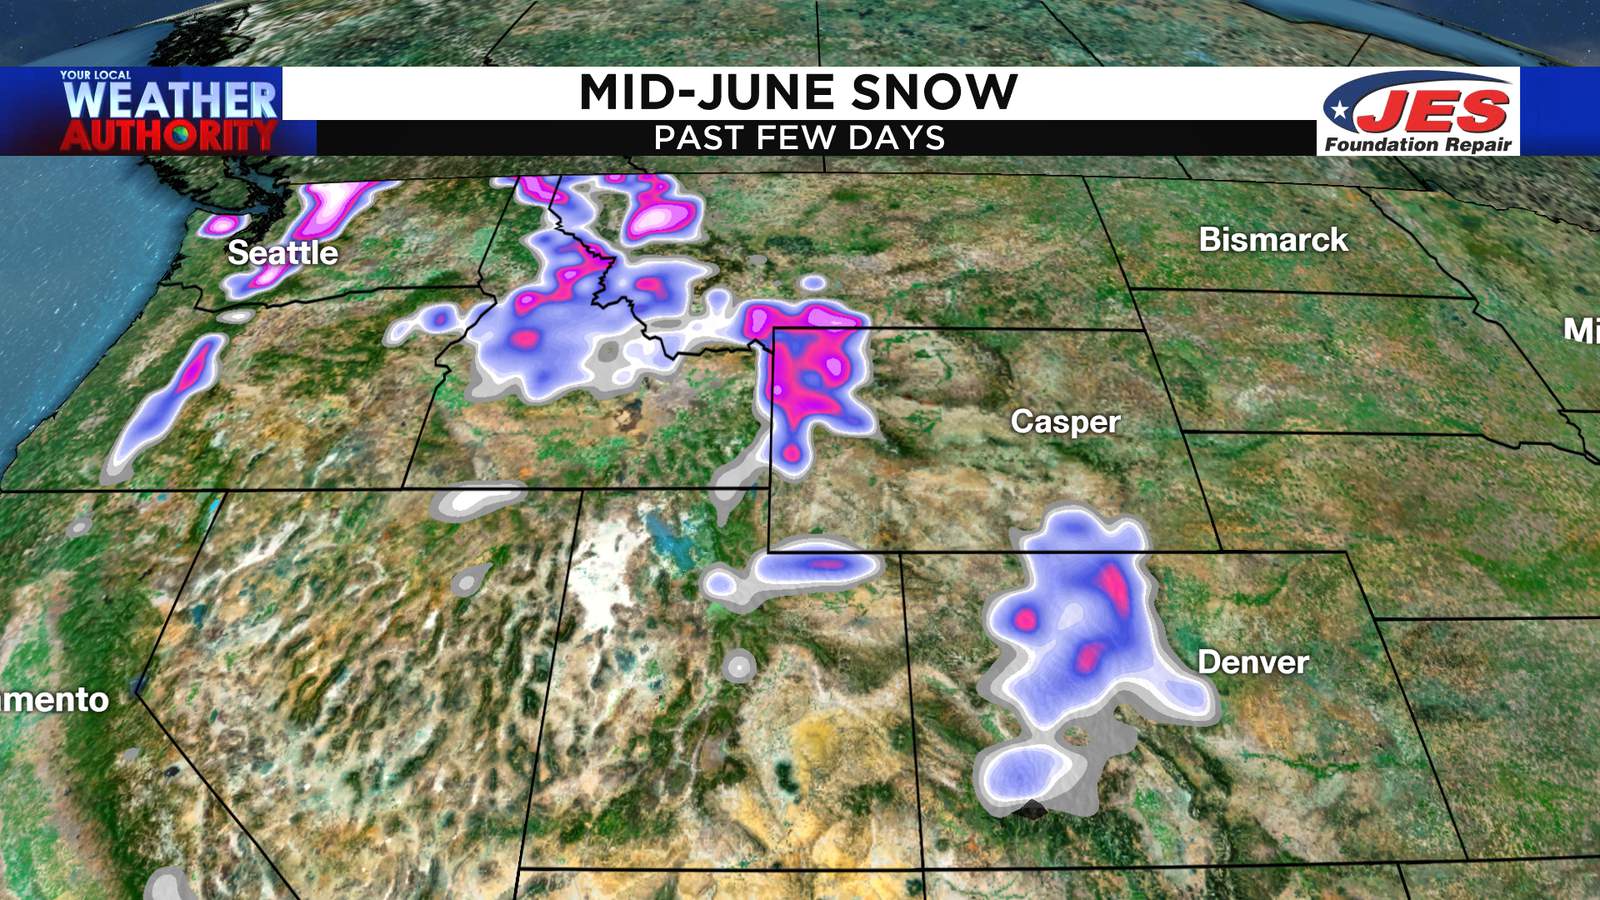 One storm leads to mid-June snow, severe storms and record heat across parts of the country